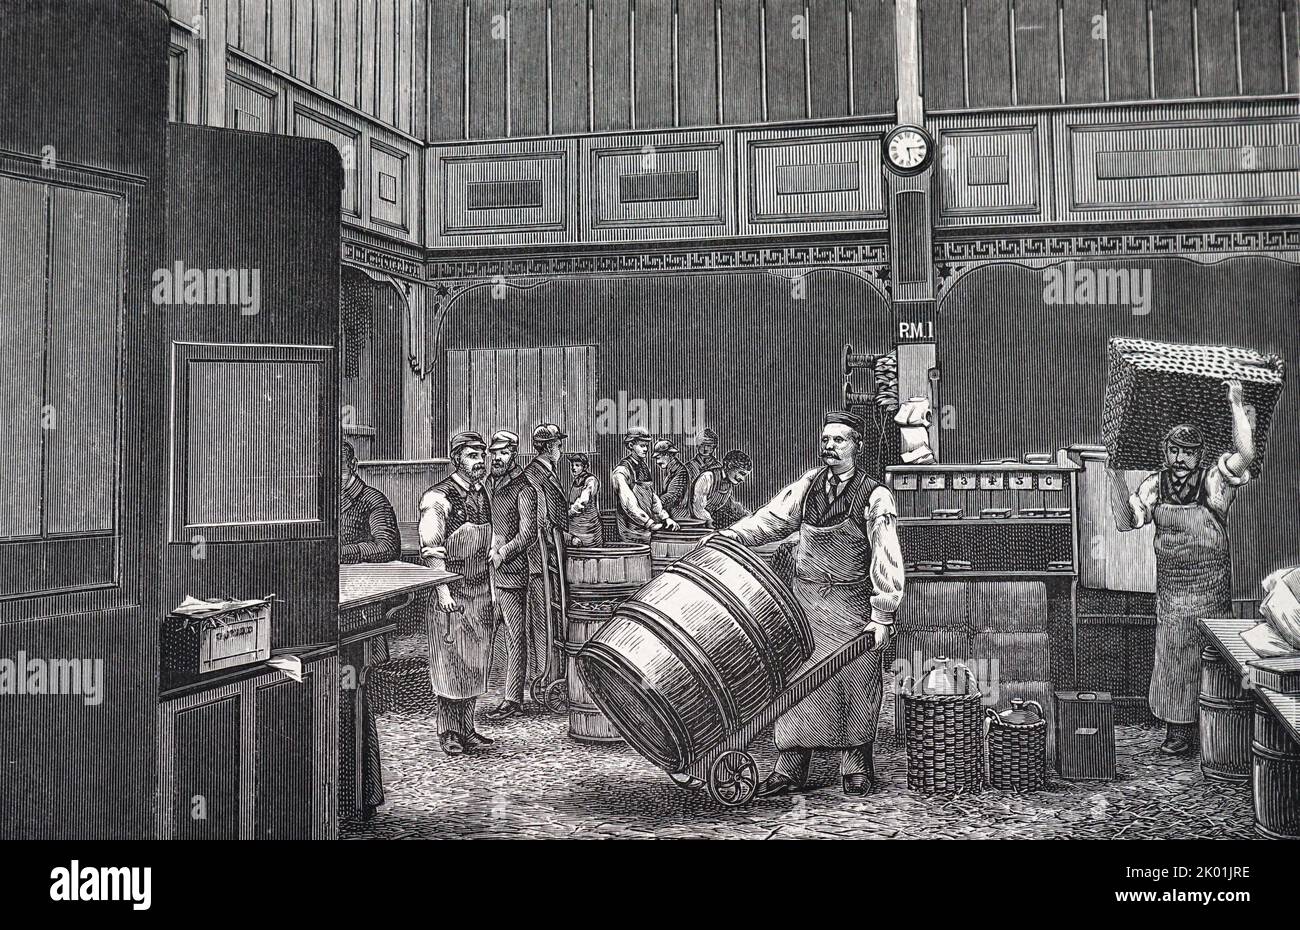 Packing room, Evans & Sons drugs warehouse, Liverpool, 1887. Stock Photo